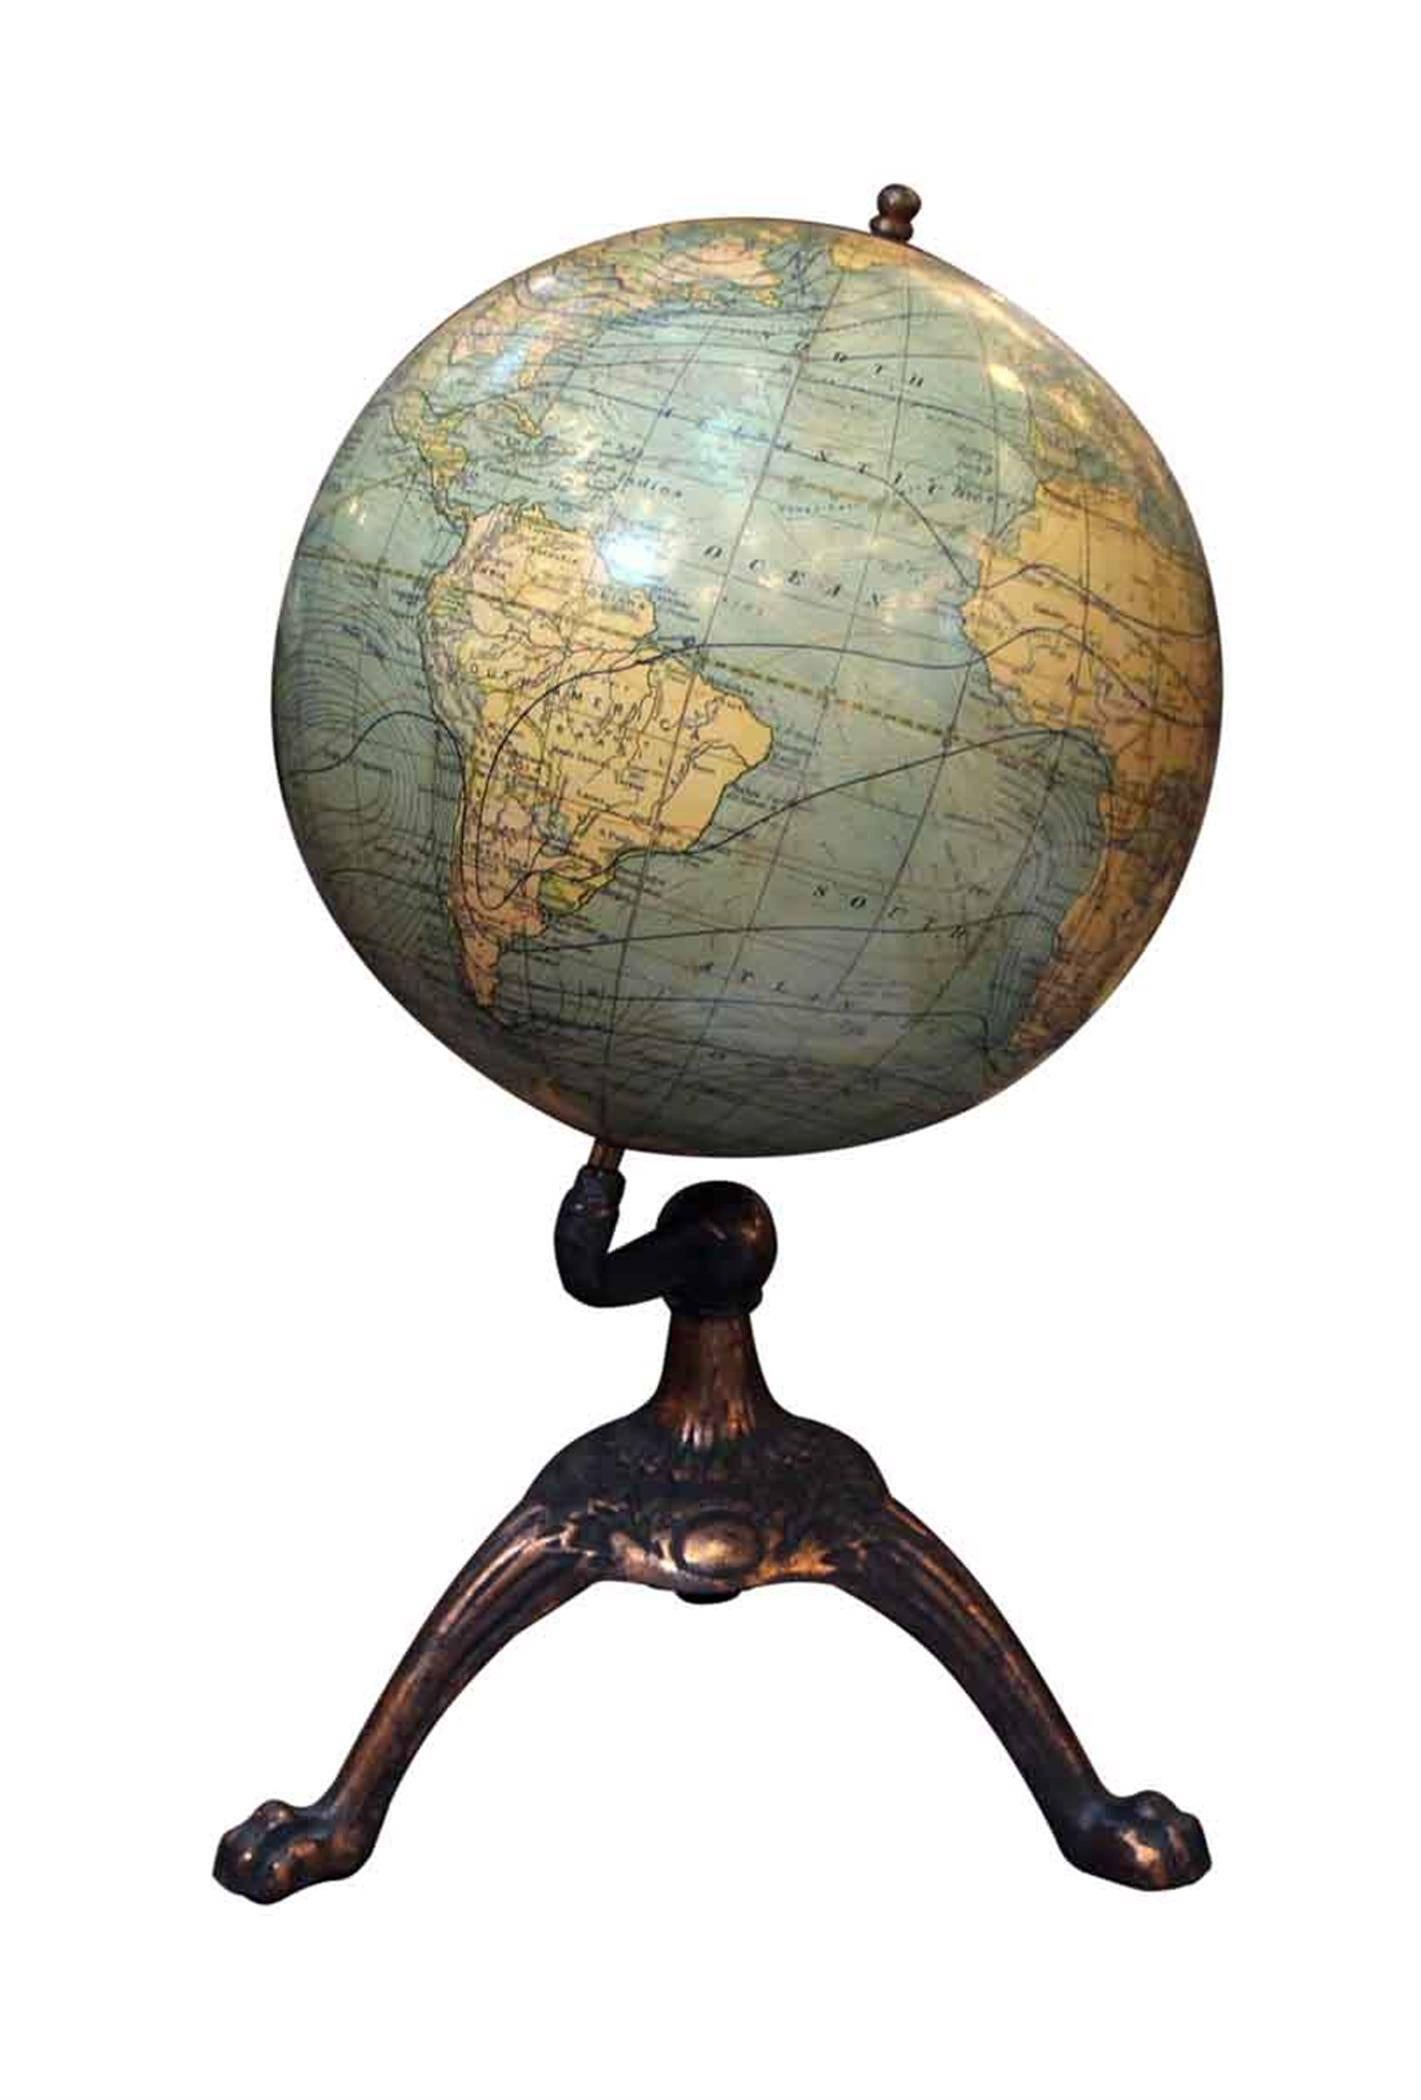 1920s C.S. Hammond & Co., New York. Measure: 8 inch table top New Terrestrial globe. Dull paper gores over plaster, time dial at North Pole. Oceans finished in olive green with ocean currents, isothermal lines, trade winds and analemma. Offset